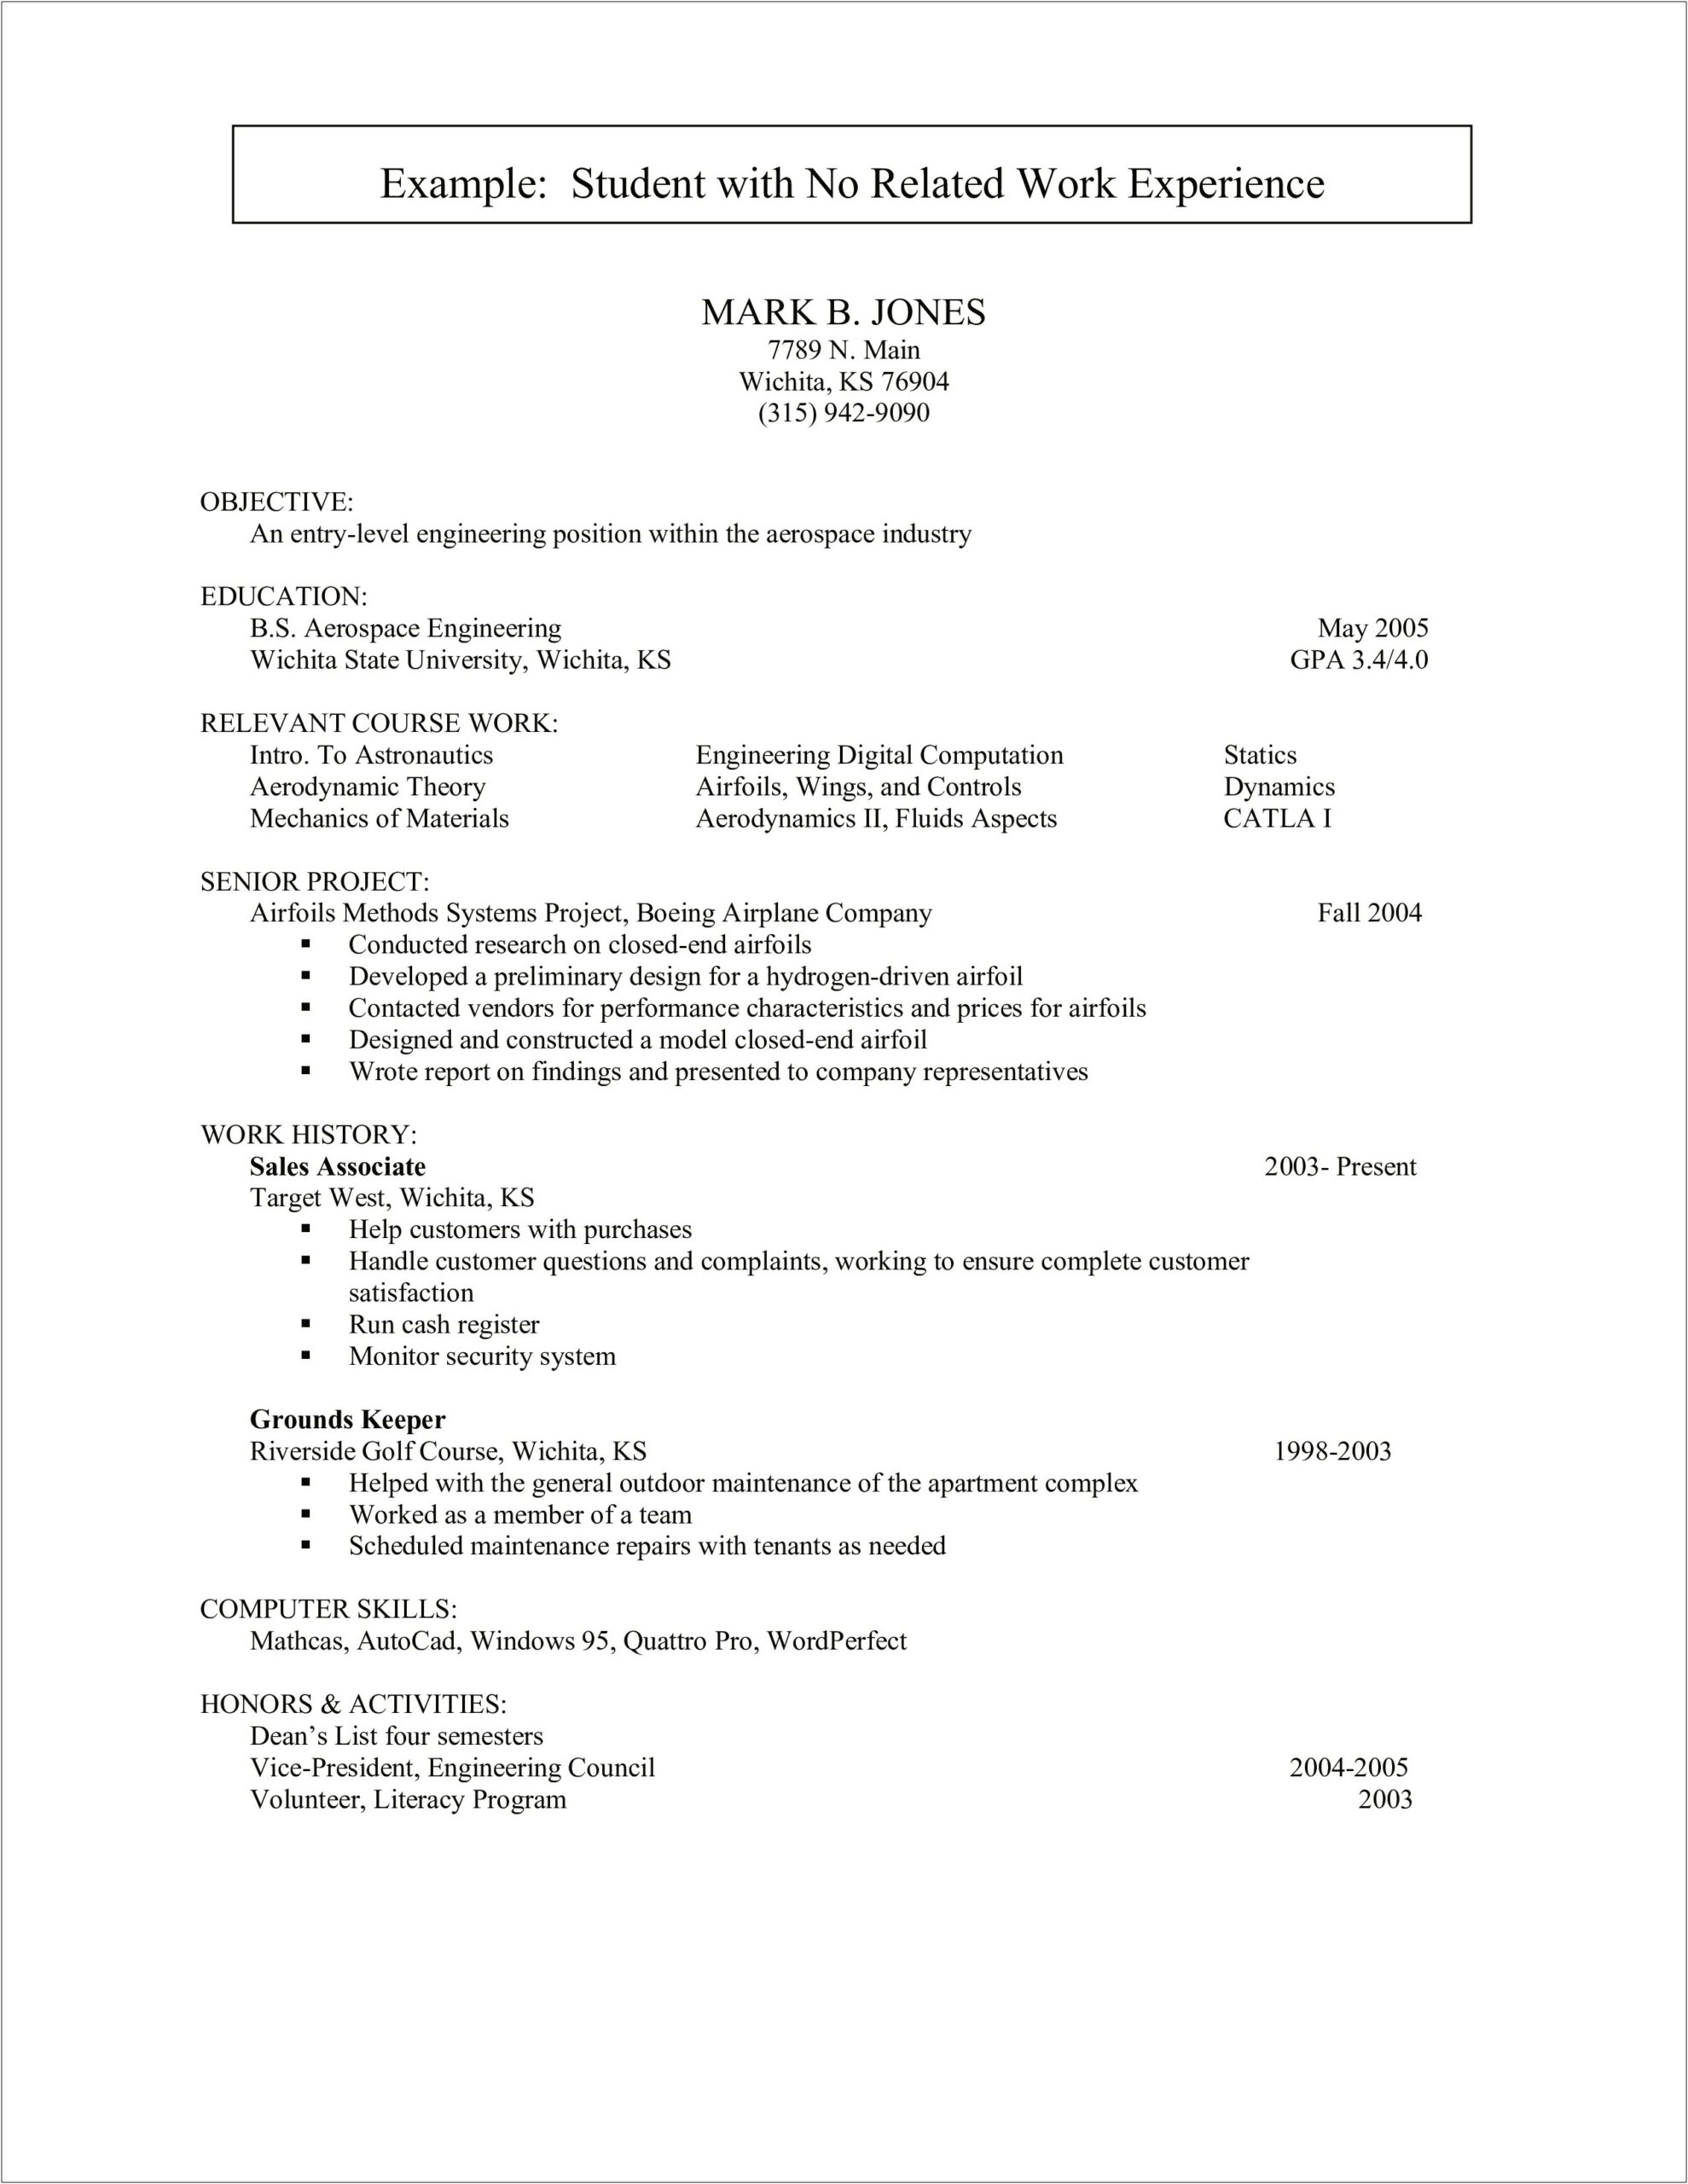 Resume Template For Someone With No Work Experience